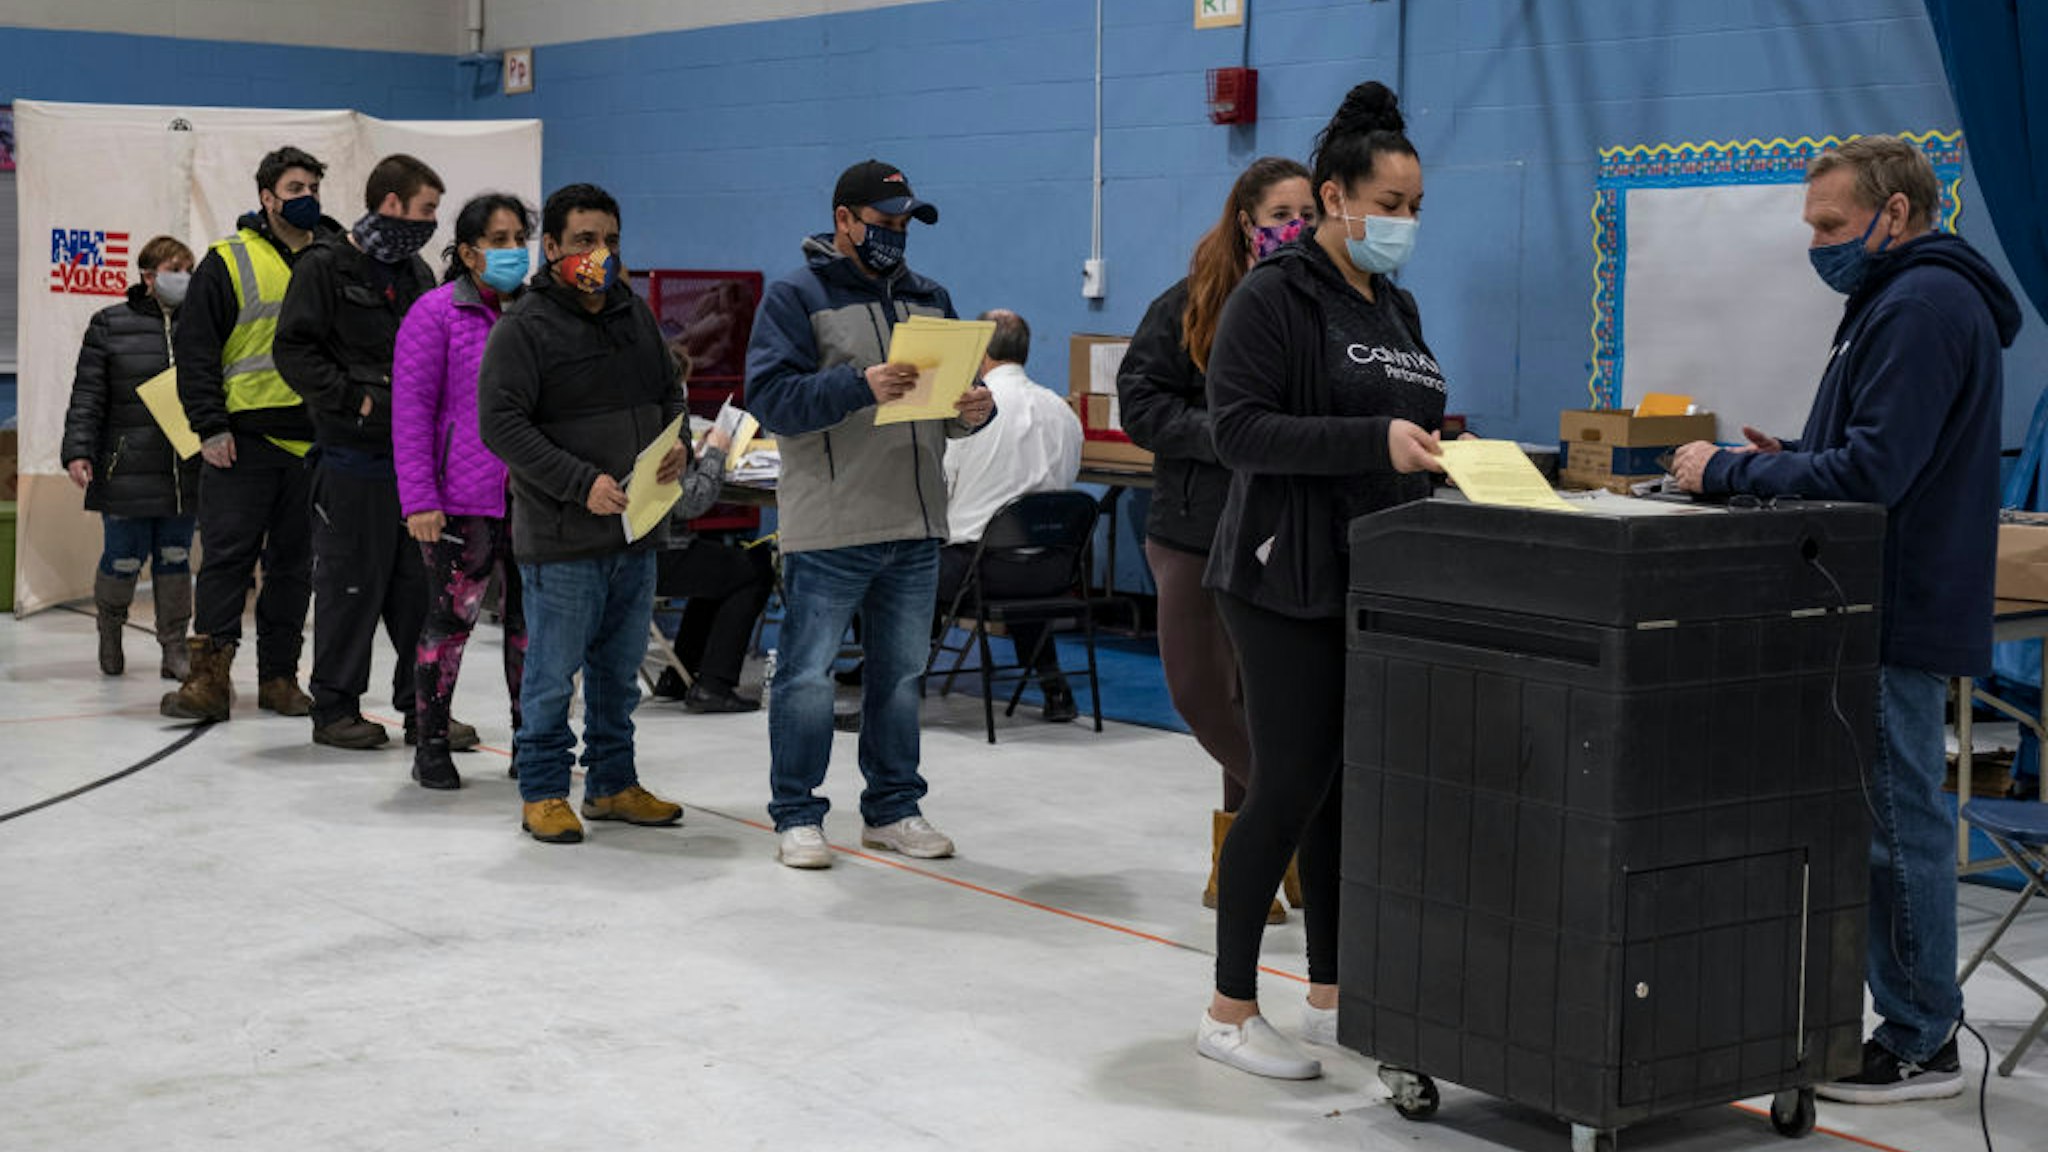 Voters lined up to cast their ballots at the Bishop Leo E. ONeil Youth Center Ward 9 polling place in Manchester, New Hampshire, one of the city's busiest, as Americans rushed to vote in the presidential election on November 3, 2020.